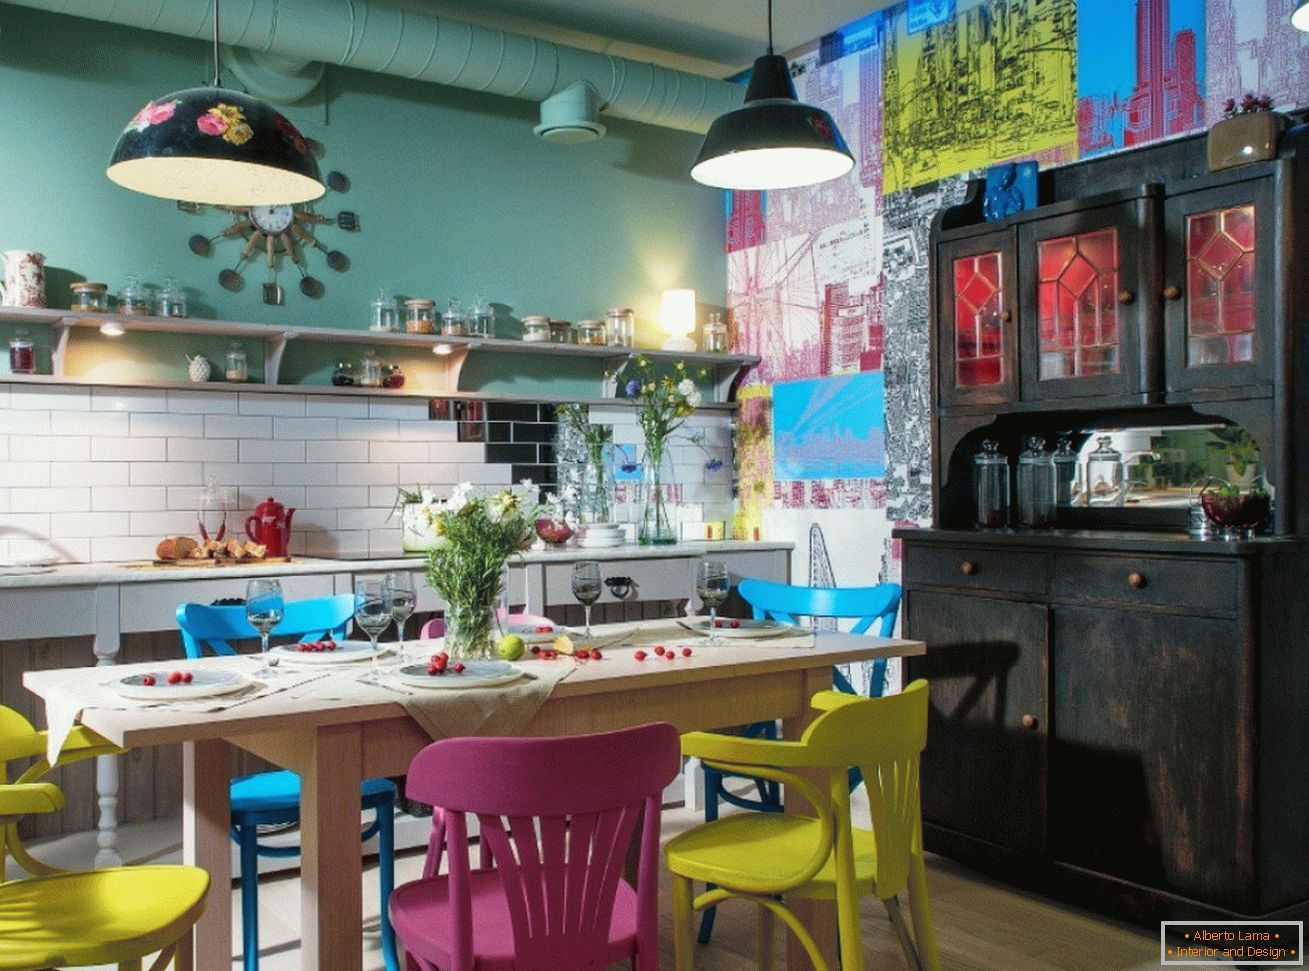 Bright chairs and a wall in the kitchen